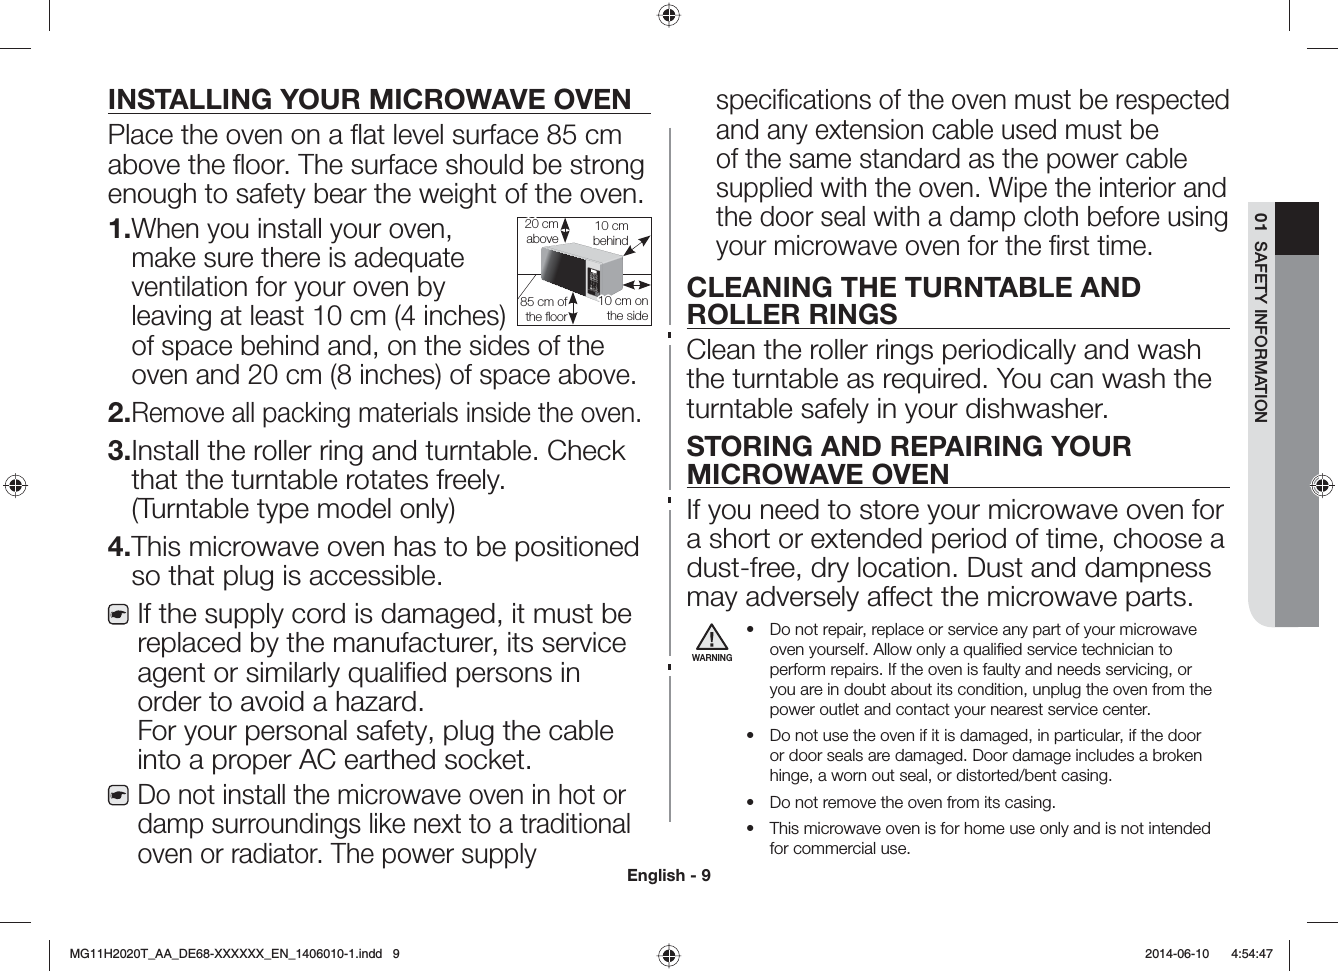 English - 901  SAFETY INFORMATIONINSTALLING YOUR MICROWAVE OVENPlace the oven on a ﬂat level surface 85 cm above the ﬂoor. The surface should be strong enough to safety bear the weight of the oven.1. When you install your oven, make sure there is adequate ventilation for your oven by leaving at least 10 cm (4 inches) of space behind and, on the sides of the oven and 20 cm (8 inches) of space above.2. Remove all packing materials inside the oven.3. Install the roller ring and turntable. Check that the turntable rotates freely. (Turntable type model only)4. This microwave oven has to be positioned so that plug is accessible.If the supply cord is damaged, it must be replaced by the manufacturer, its service agent or similarly qualiﬁed persons in order to avoid a hazard. For your personal safety, plug the cable into a proper AC earthed socket.Do not install the microwave oven in hot or damp surroundings like next to a traditional oven or radiator. The power supply speciﬁcations of the oven must be respected and any extension cable used must be of the same standard as the power cable supplied with the oven. Wipe the interior and the door seal with a damp cloth before using your microwave oven for the ﬁrst time.CLEANING THE TURNTABLE AND ROLLER RINGSClean the roller rings periodically and wash the turntable as required. You can wash the turntable safely in your dishwasher.STORING AND REPAIRING YOUR MICROWAVE OVENIf you need to store your microwave oven for a short or extended period of time, choose a dust-free, dry location. Dust and dampness may adversely aect the microwave parts.WARNING• Do not repair, replace or service any part of your microwave oven yourself. Allow only a qualiﬁed service technician to perform repairs. If the oven is faulty and needs servicing, or you are in doubt about its condition, unplug the oven from the power outlet and contact your nearest service center.• Do not use the oven if it is damaged, in particular, if the door or door seals are damaged. Door damage includes a broken hinge, a worn out seal, or distorted/bent casing.• Do not remove the oven from its casing.• This microwave oven is for home use only and is not intended for commercial use.10 cm behind20 cm above10 cm on the side85 cm of the ﬂoor/)*6A##A&amp;&apos;::::::A&apos;0AKPFF  